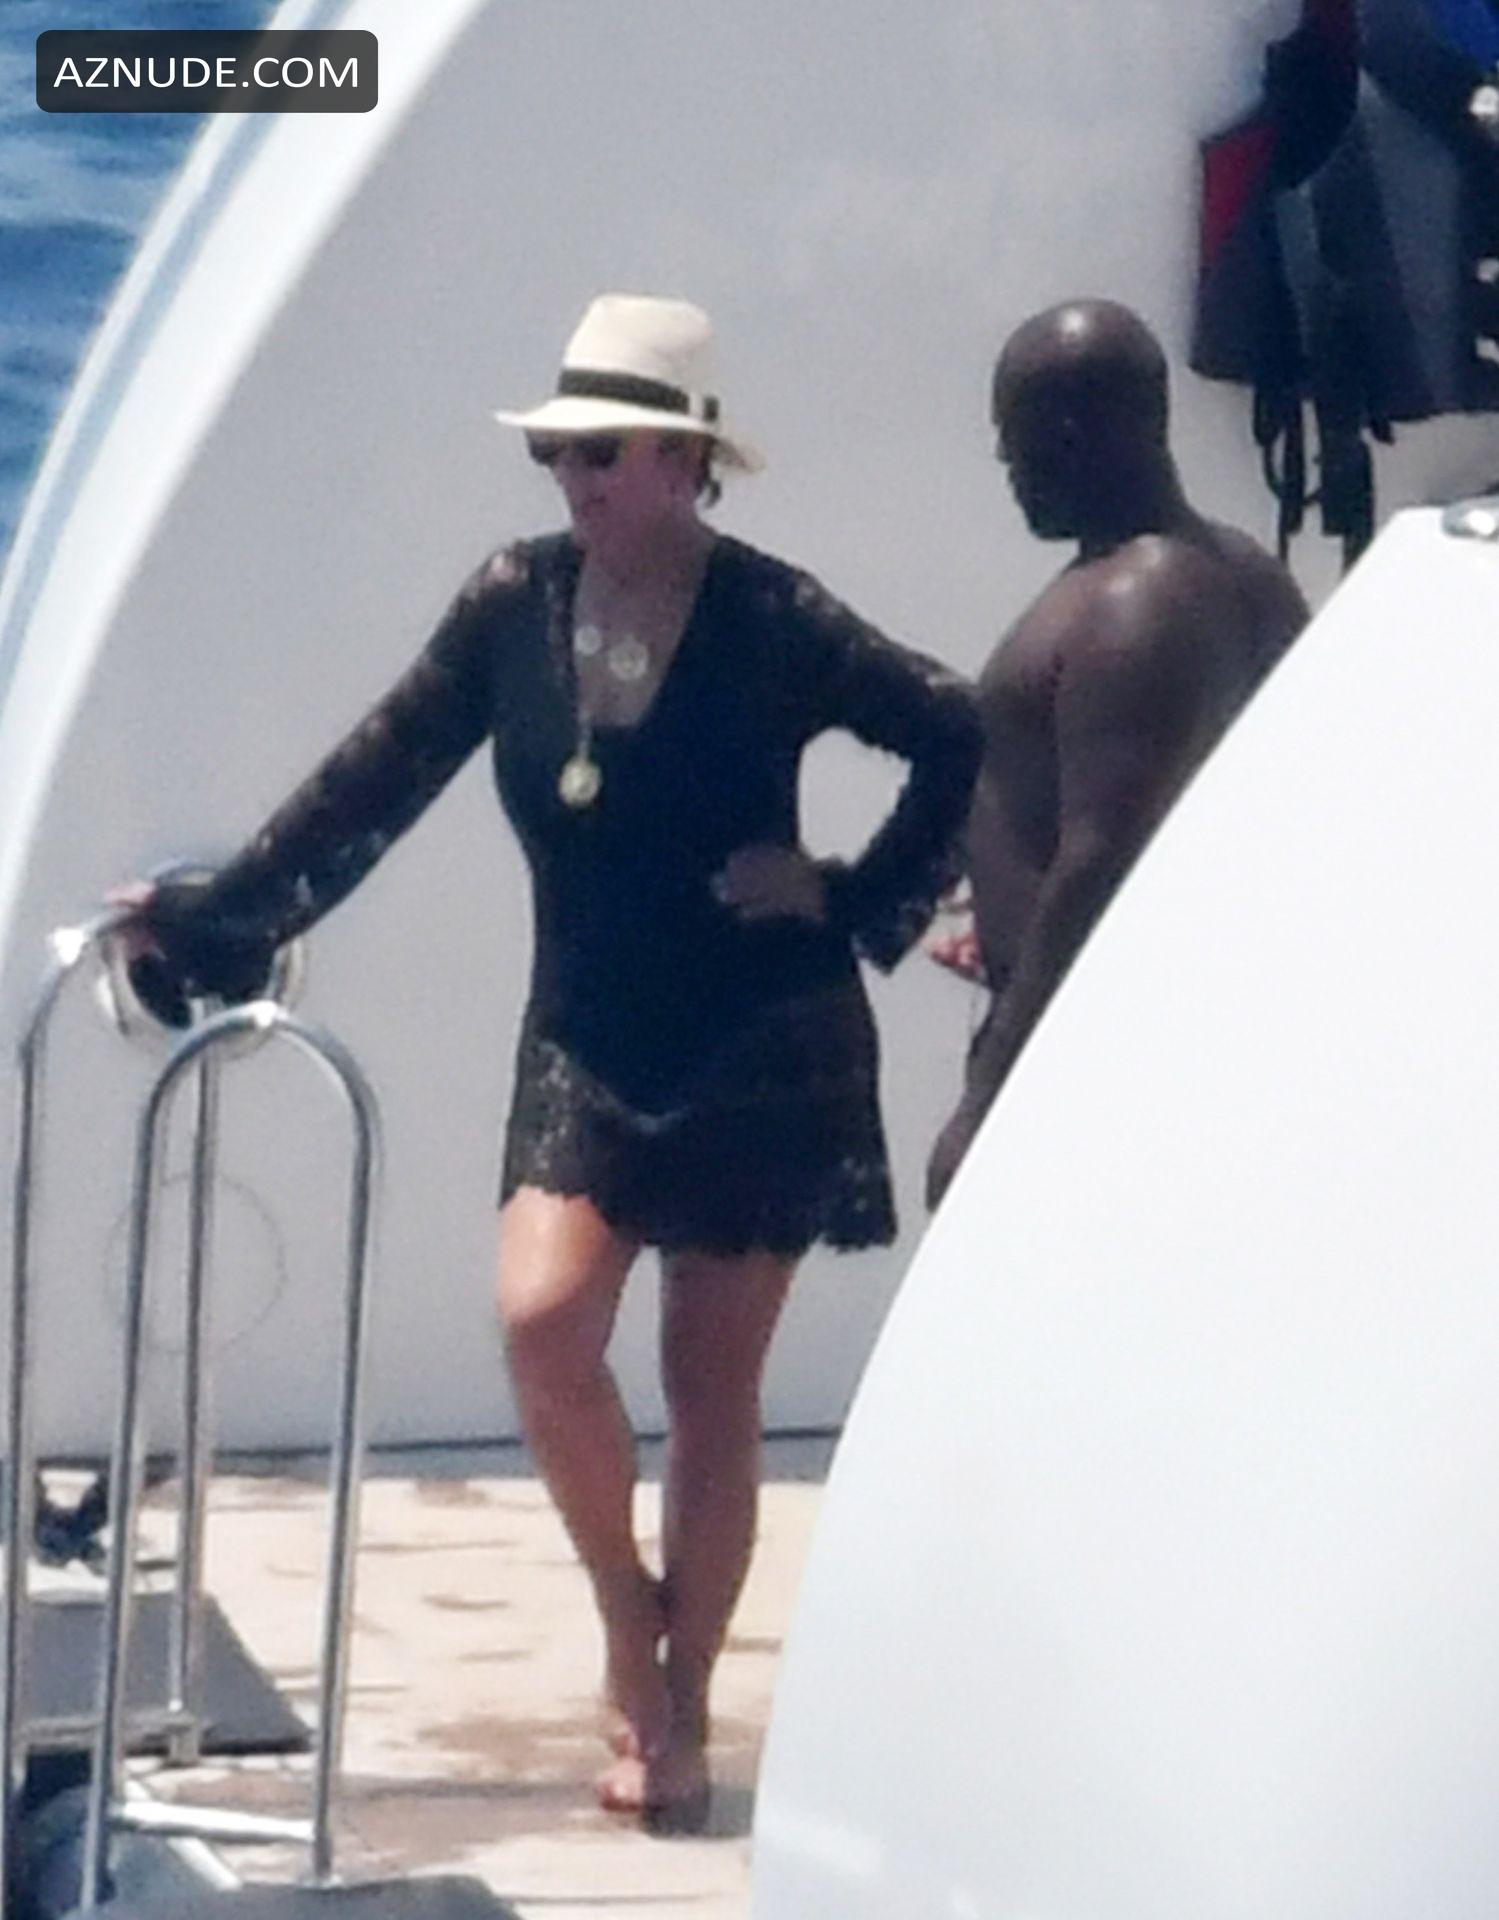 Naked kris pictures jenner [WATCH] Kris